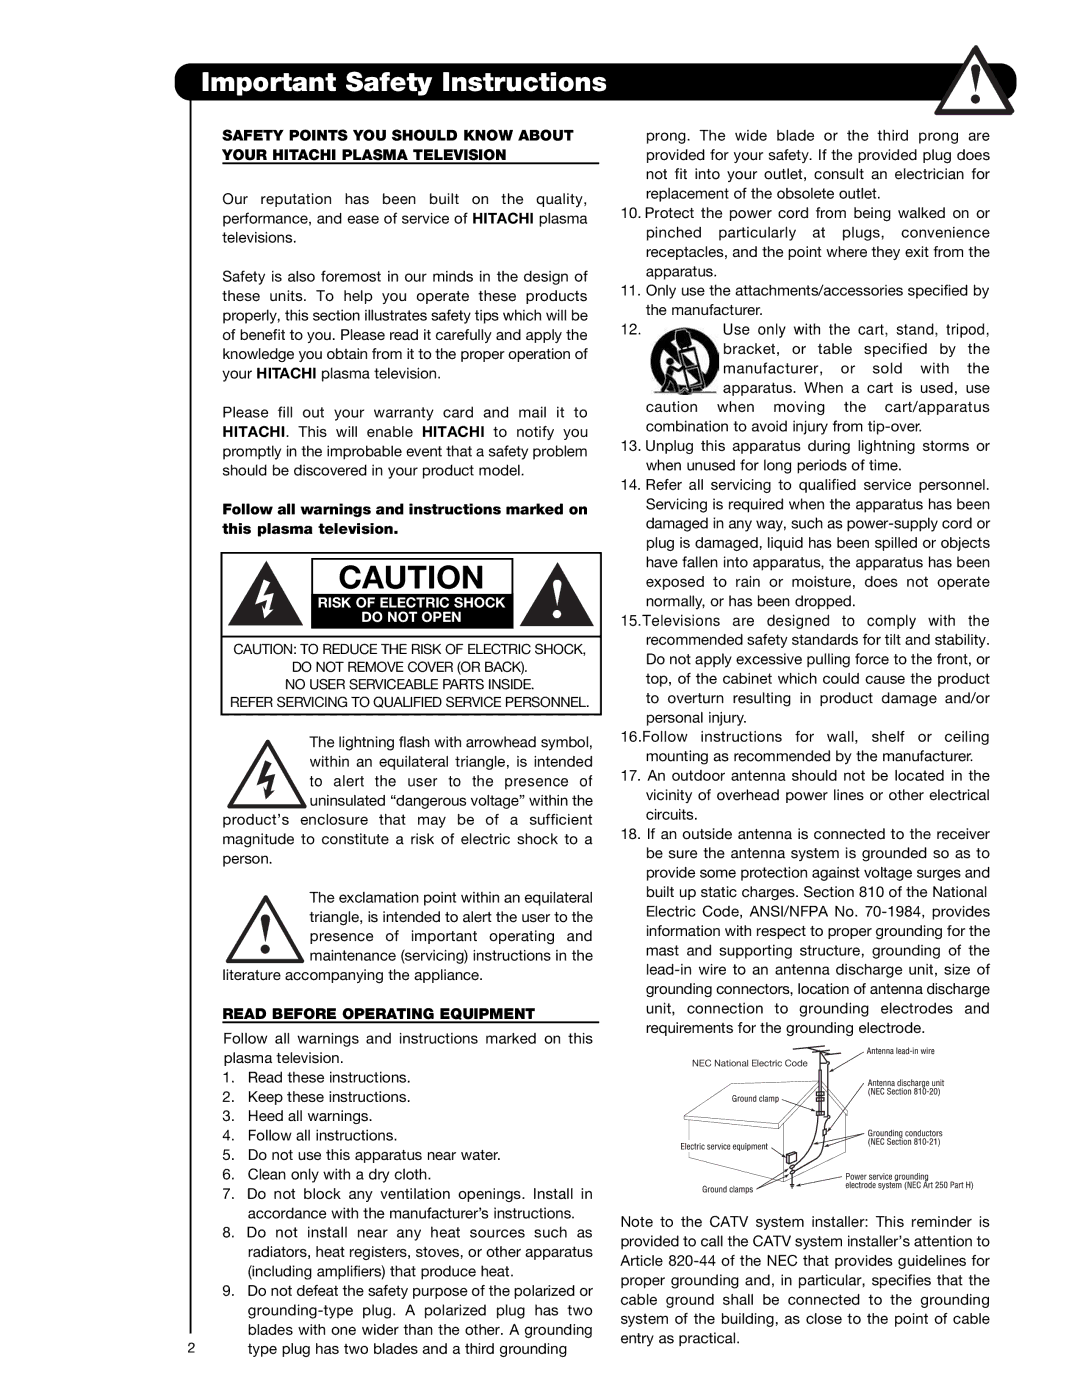 Hitachi P55H401, P42H4011, P50H401A Important Safety Instructions, Read Before Operating Equipment 